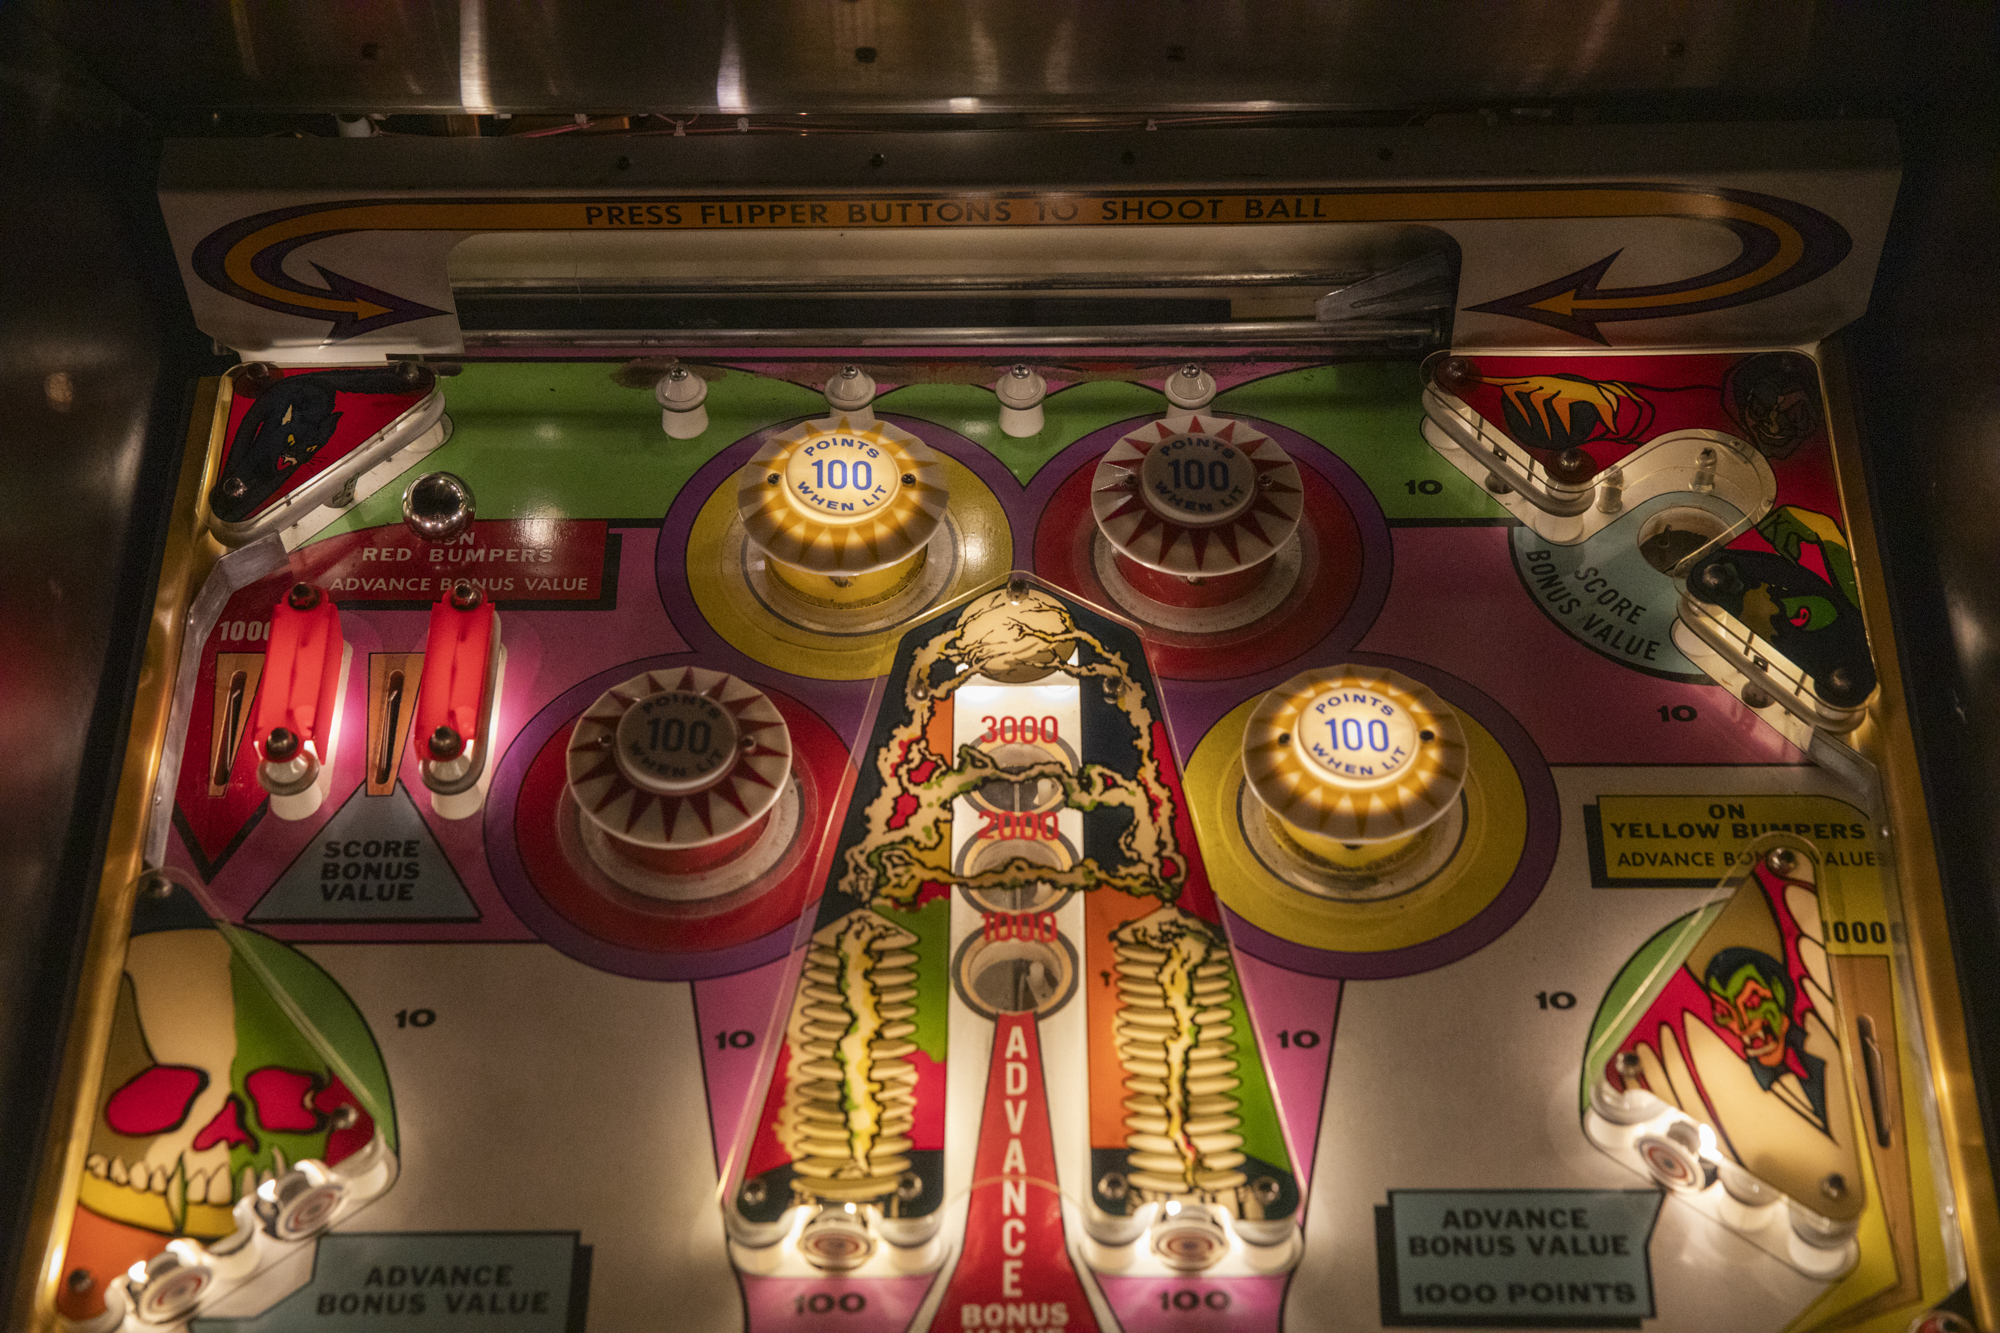 The lighted up display of a vintage pinball machine.